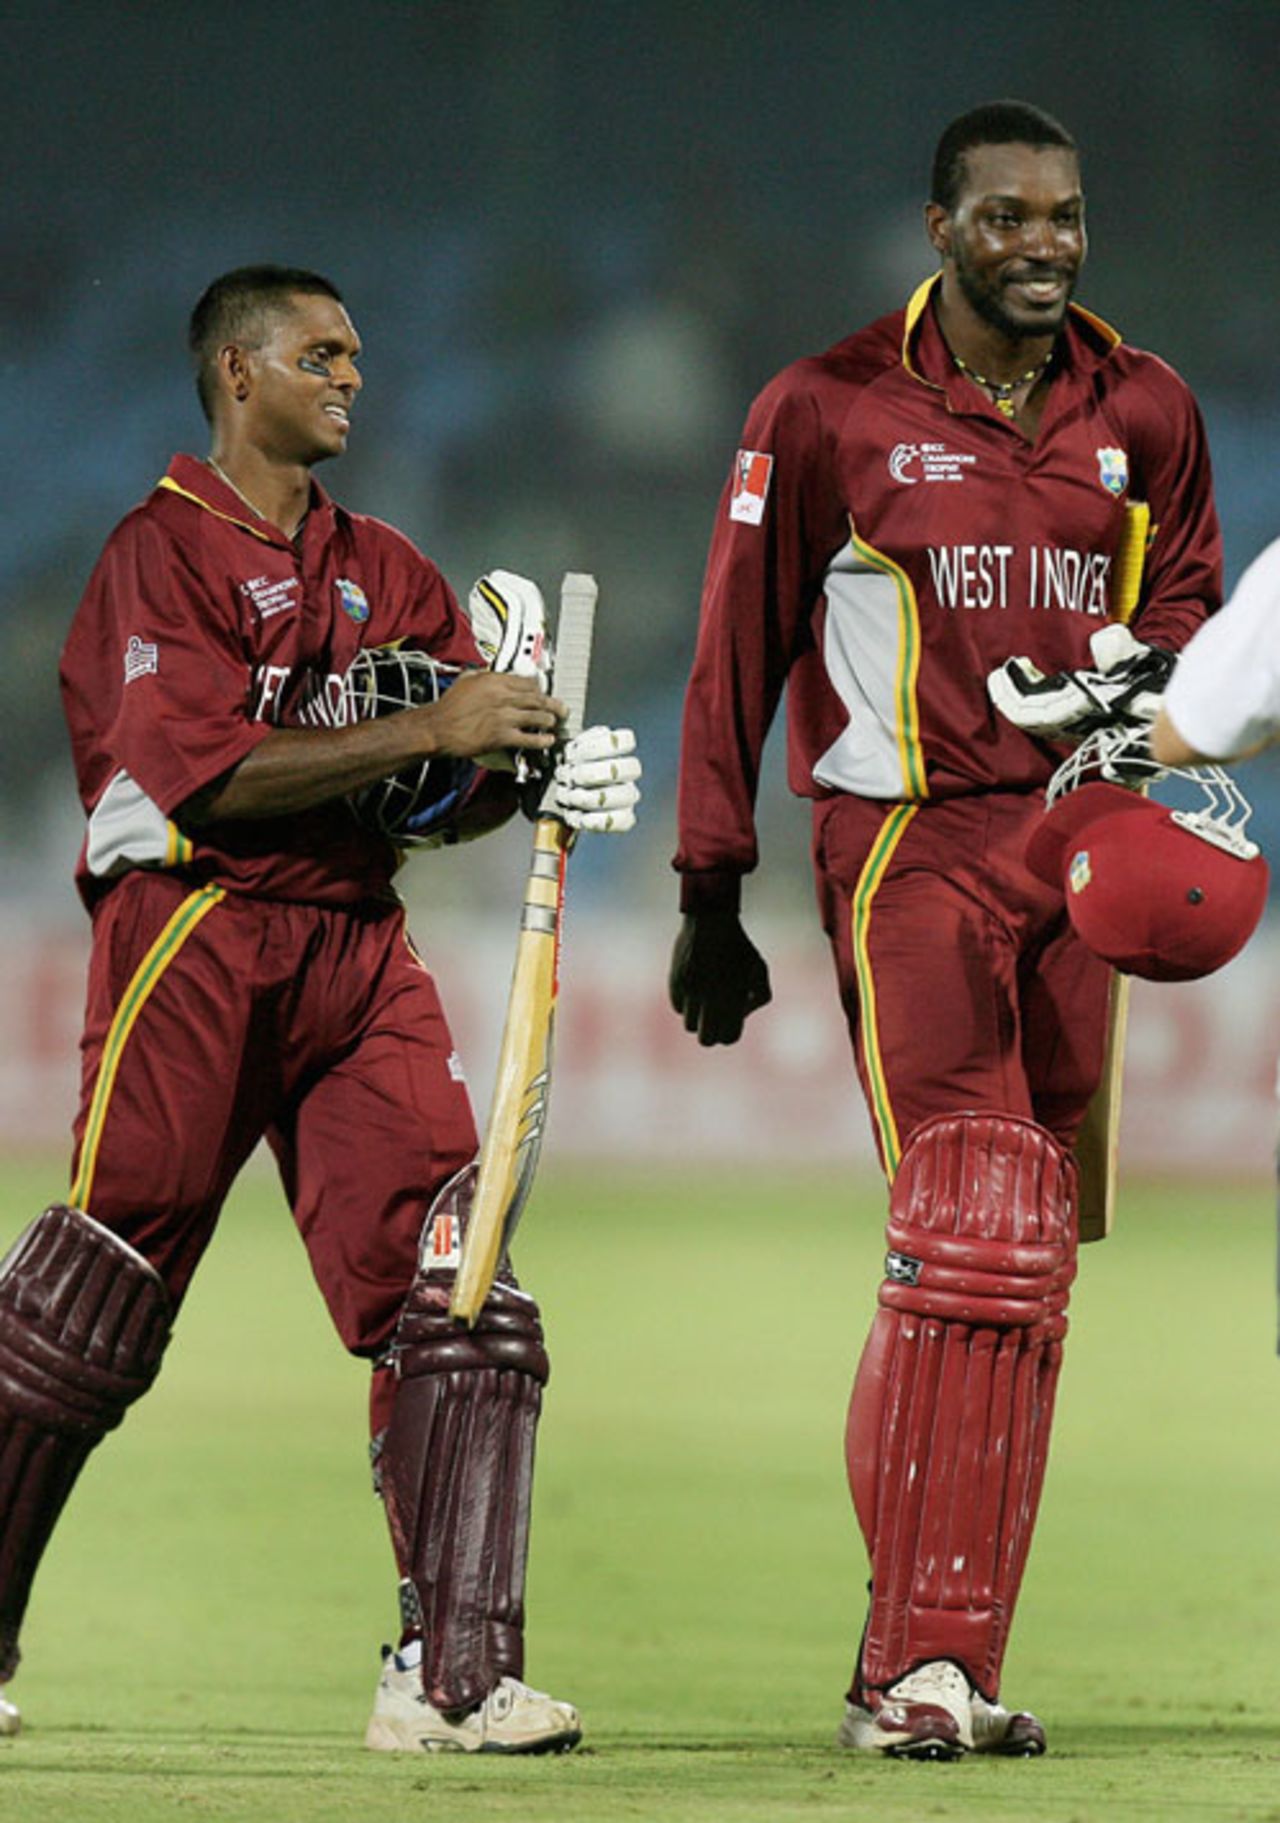 Shivnarine Chanderpaul and Chris Gayle completed a 10-wicket win for West Indies, West Indies v Bangladesh, Champions Trophy, Jaipur, October 11, 2006